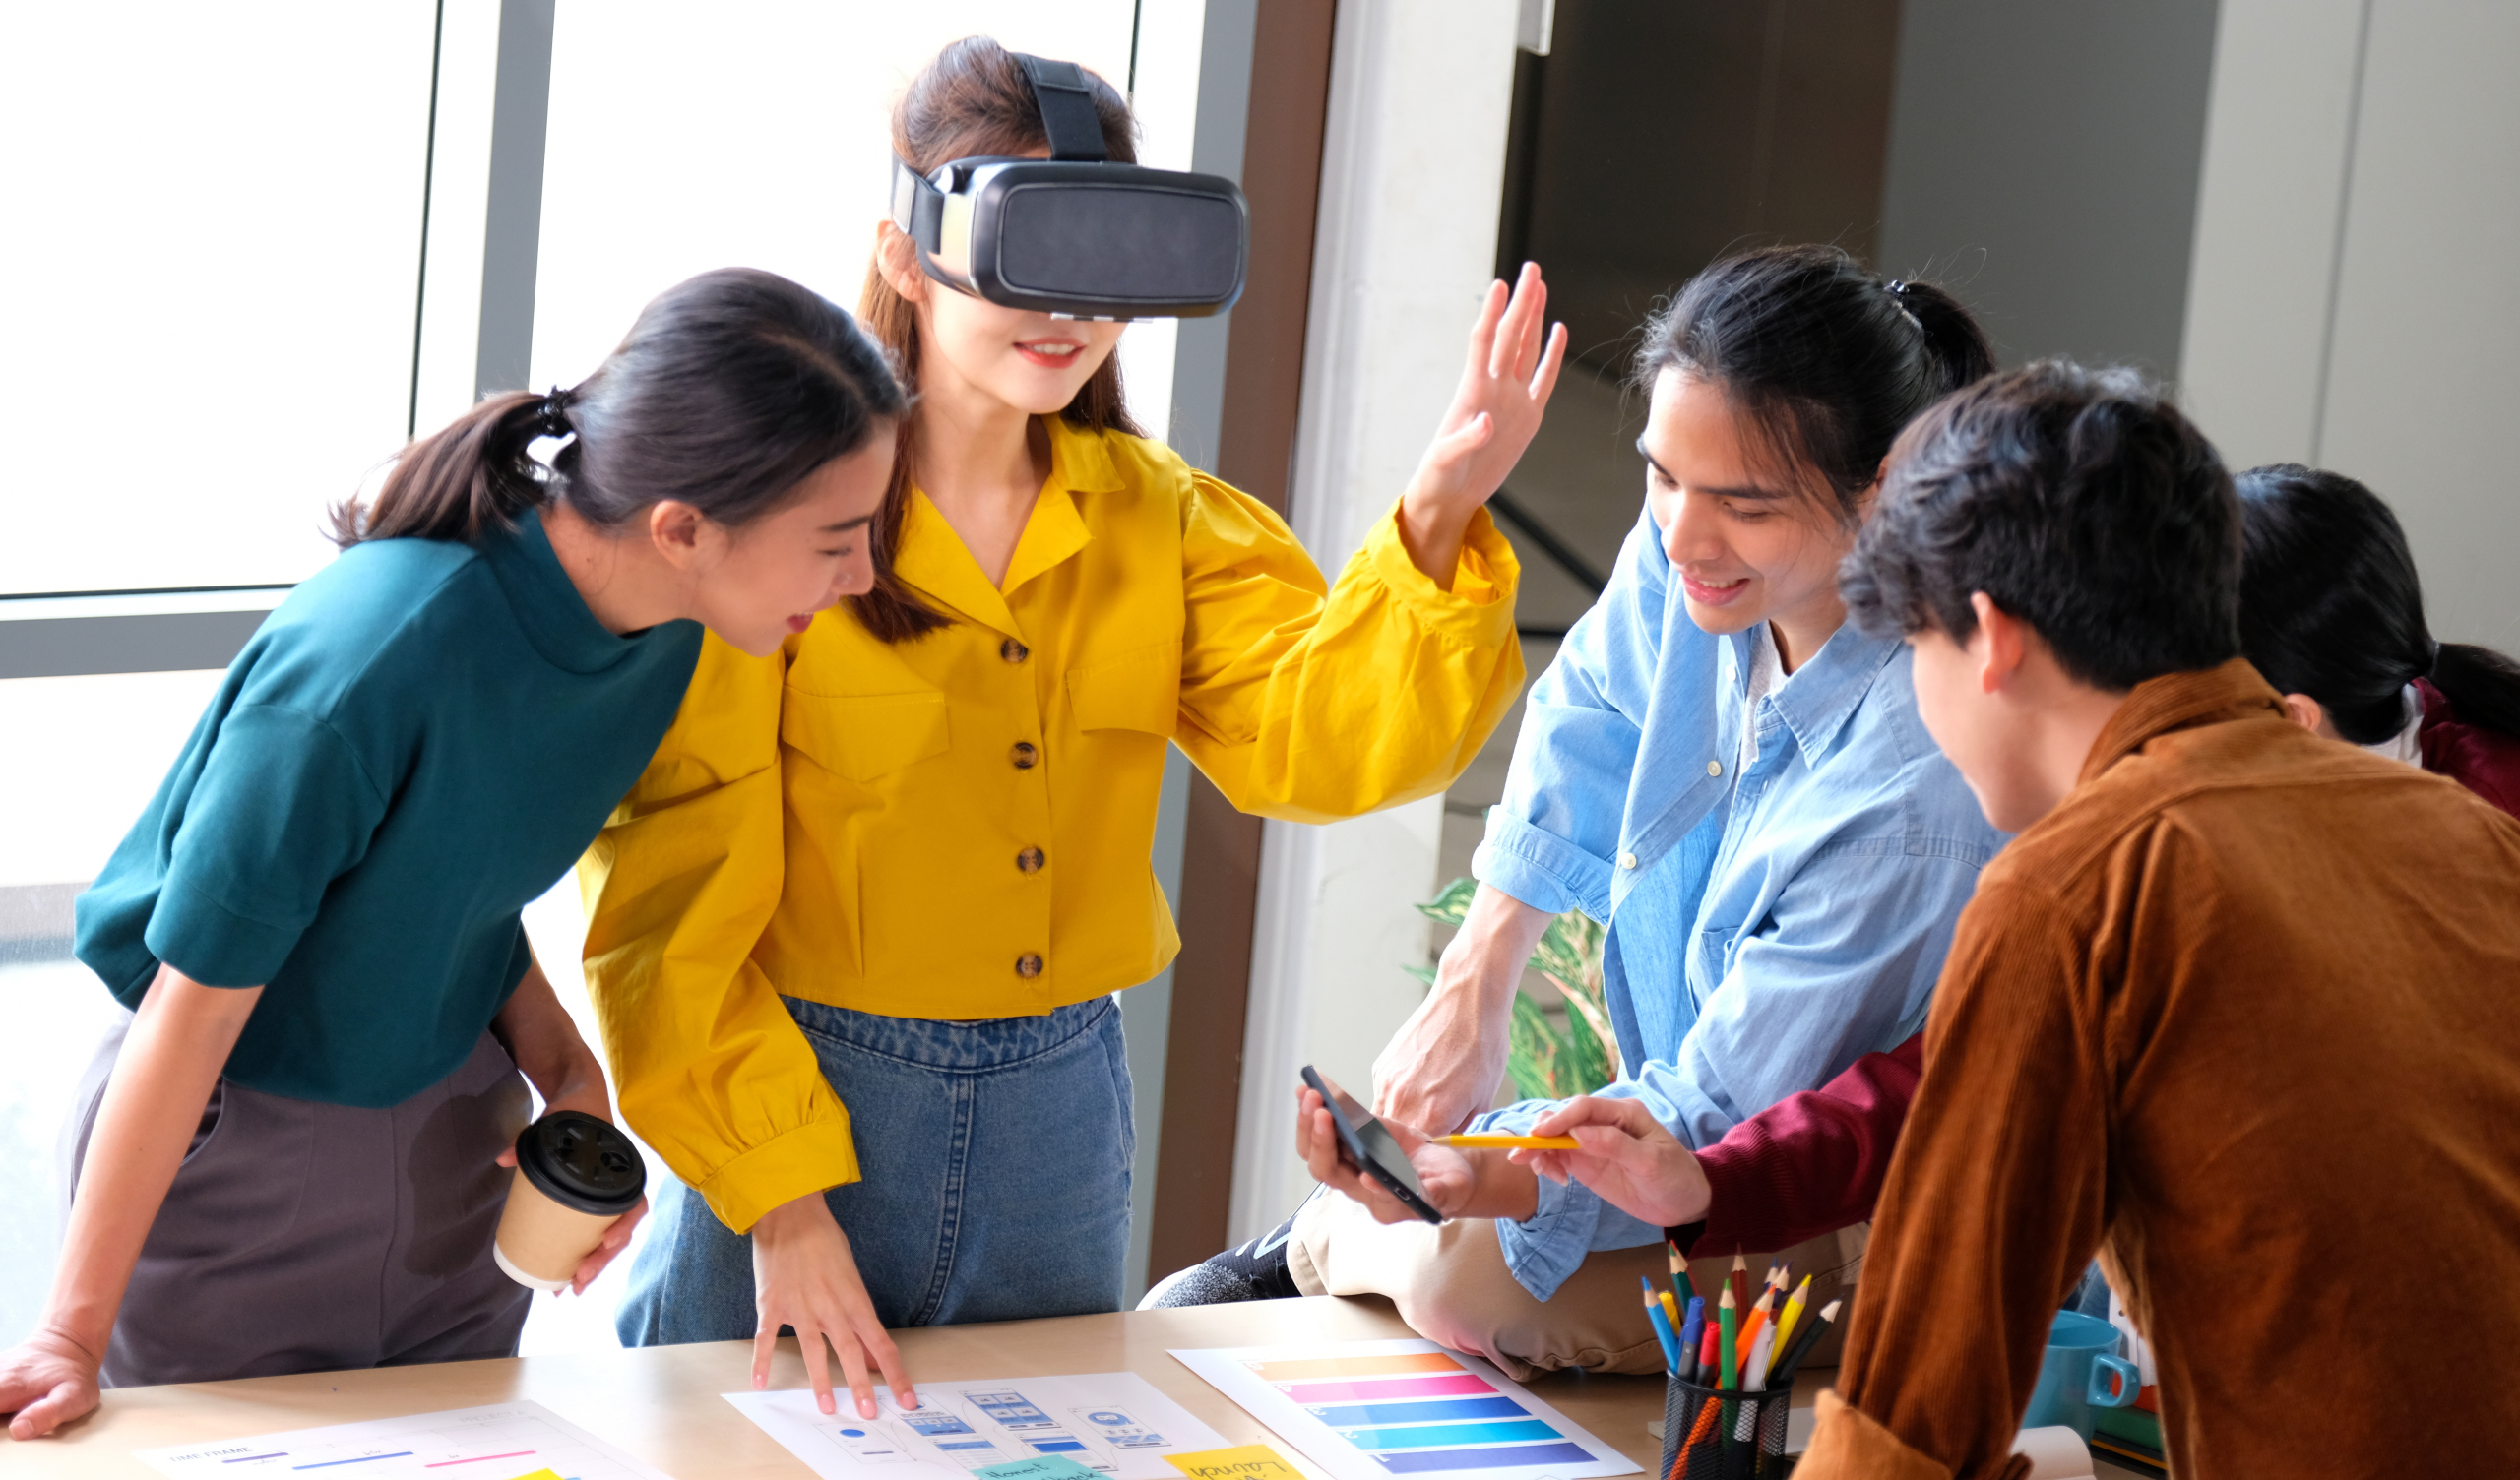 4 Ways Enterprise Augmented Reality Can Help Your Business